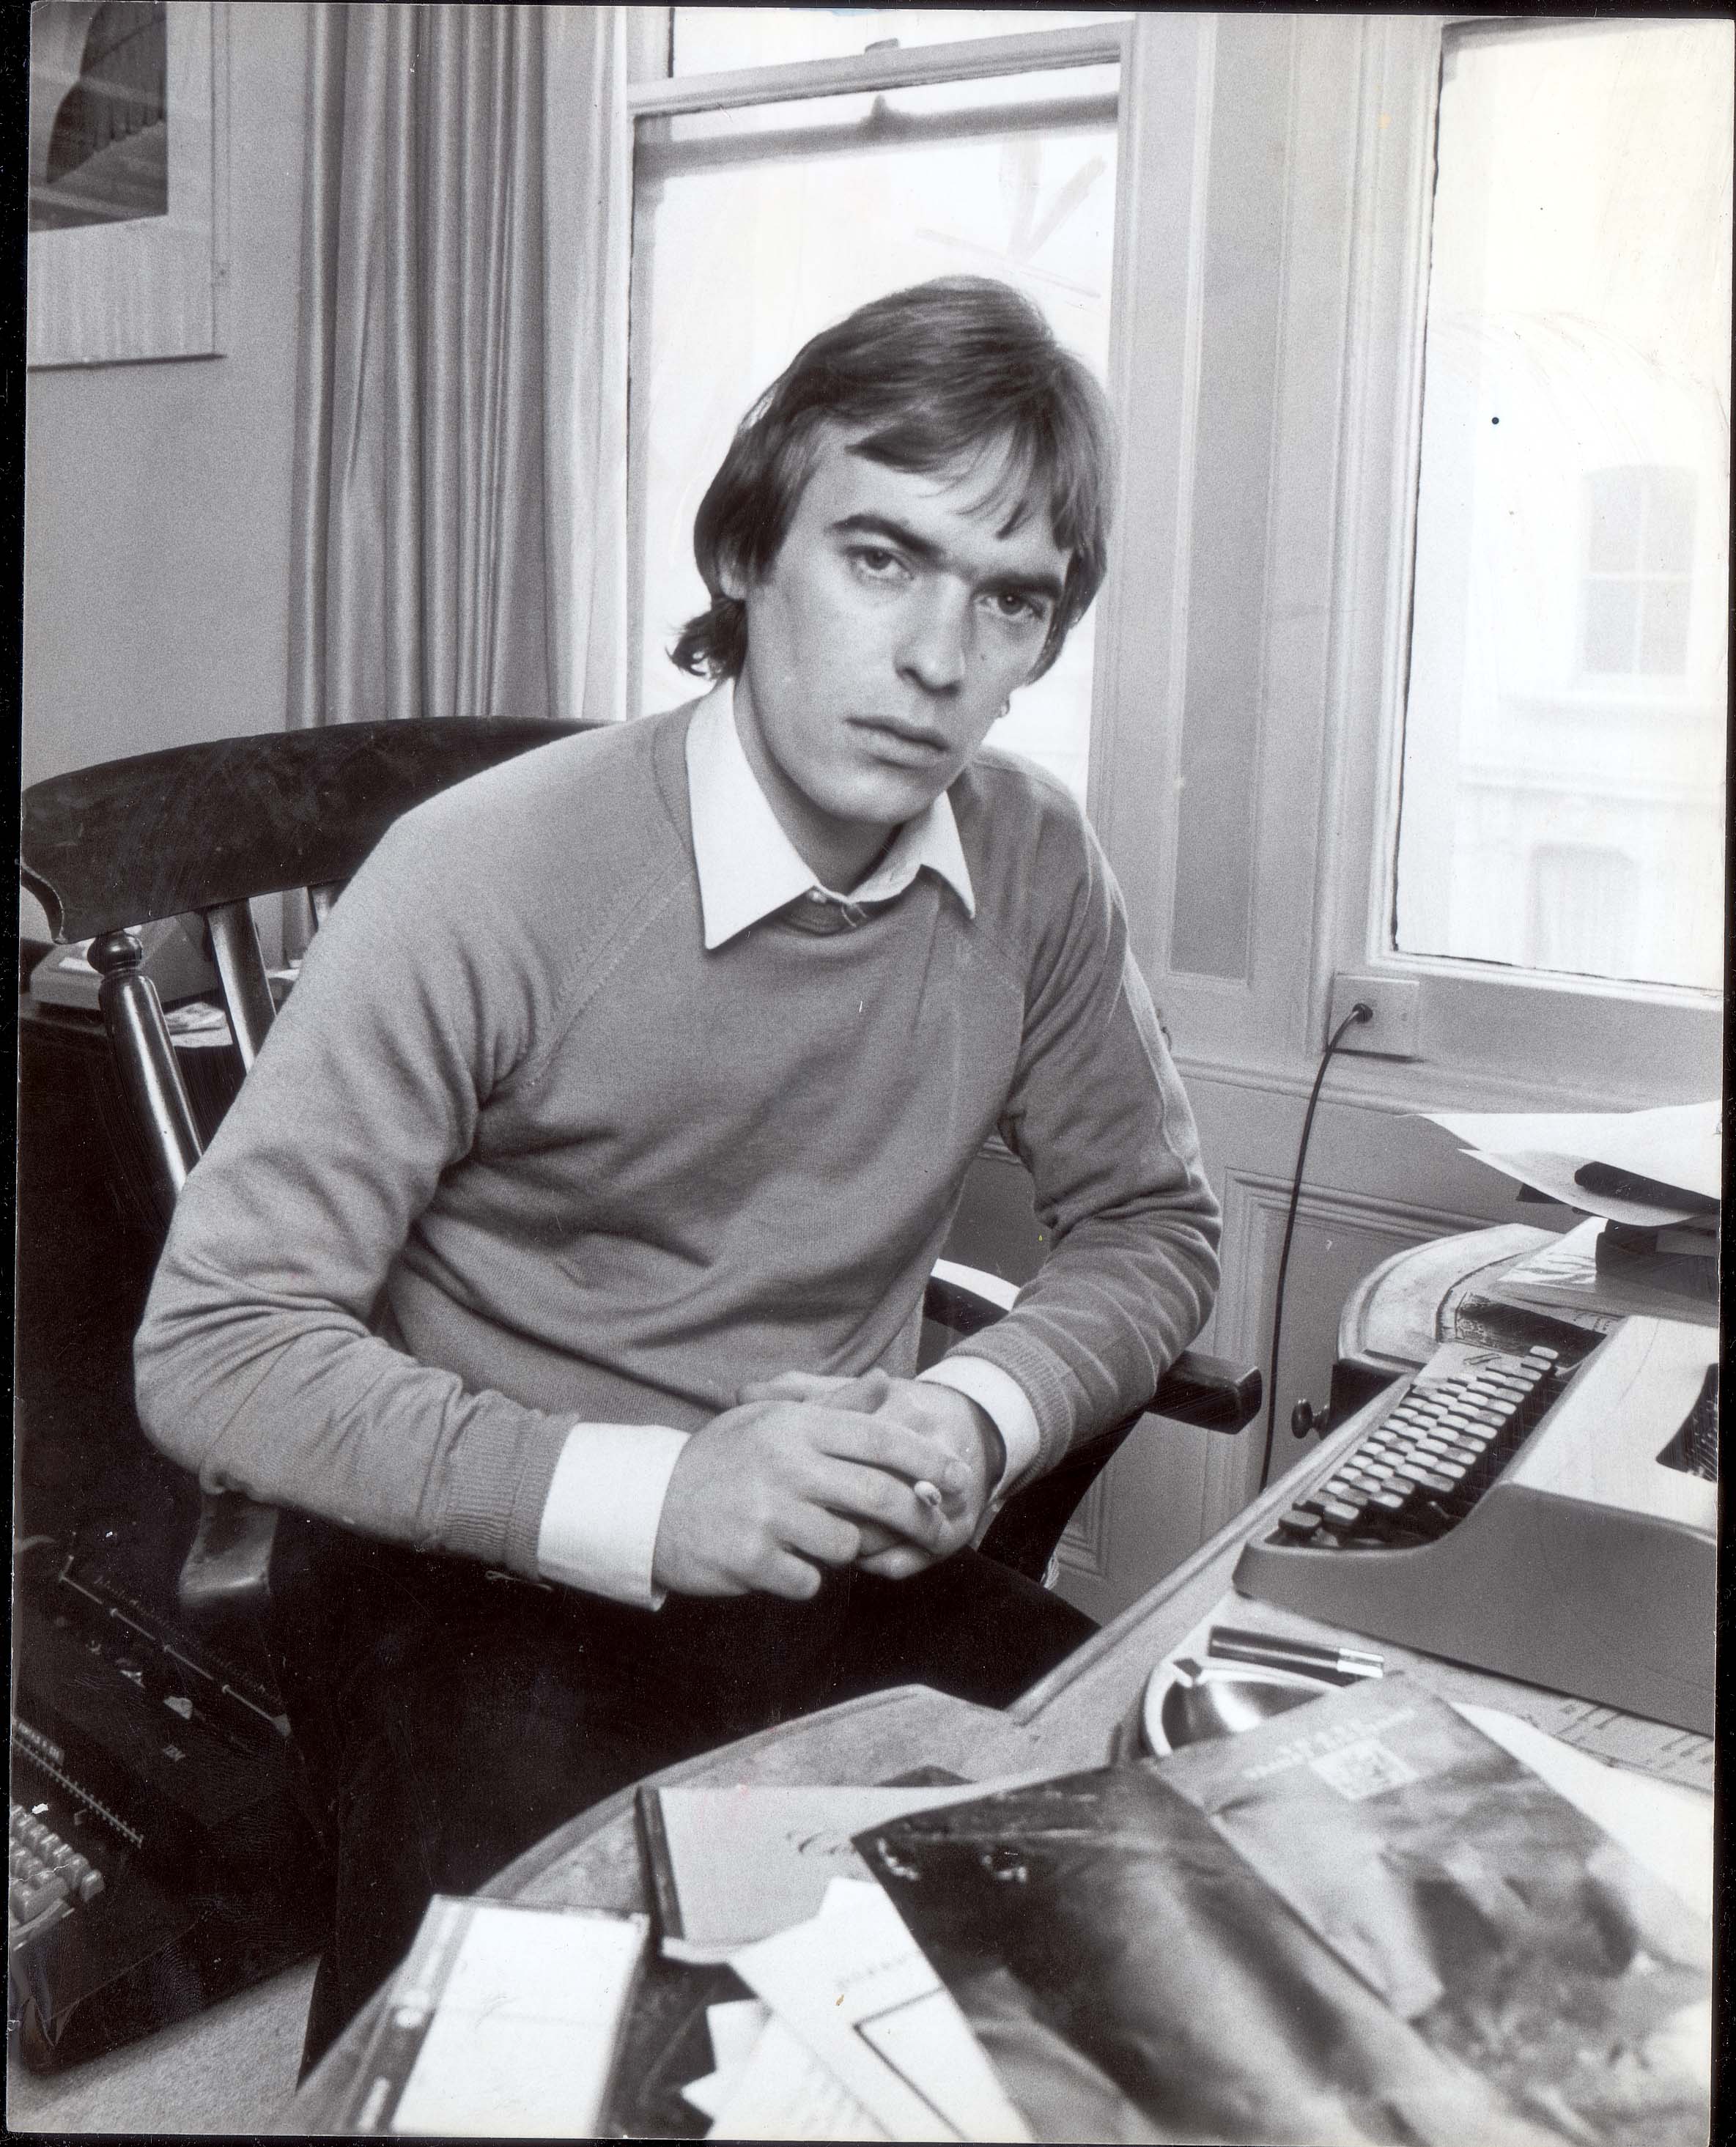 Amis at home in London, 1981